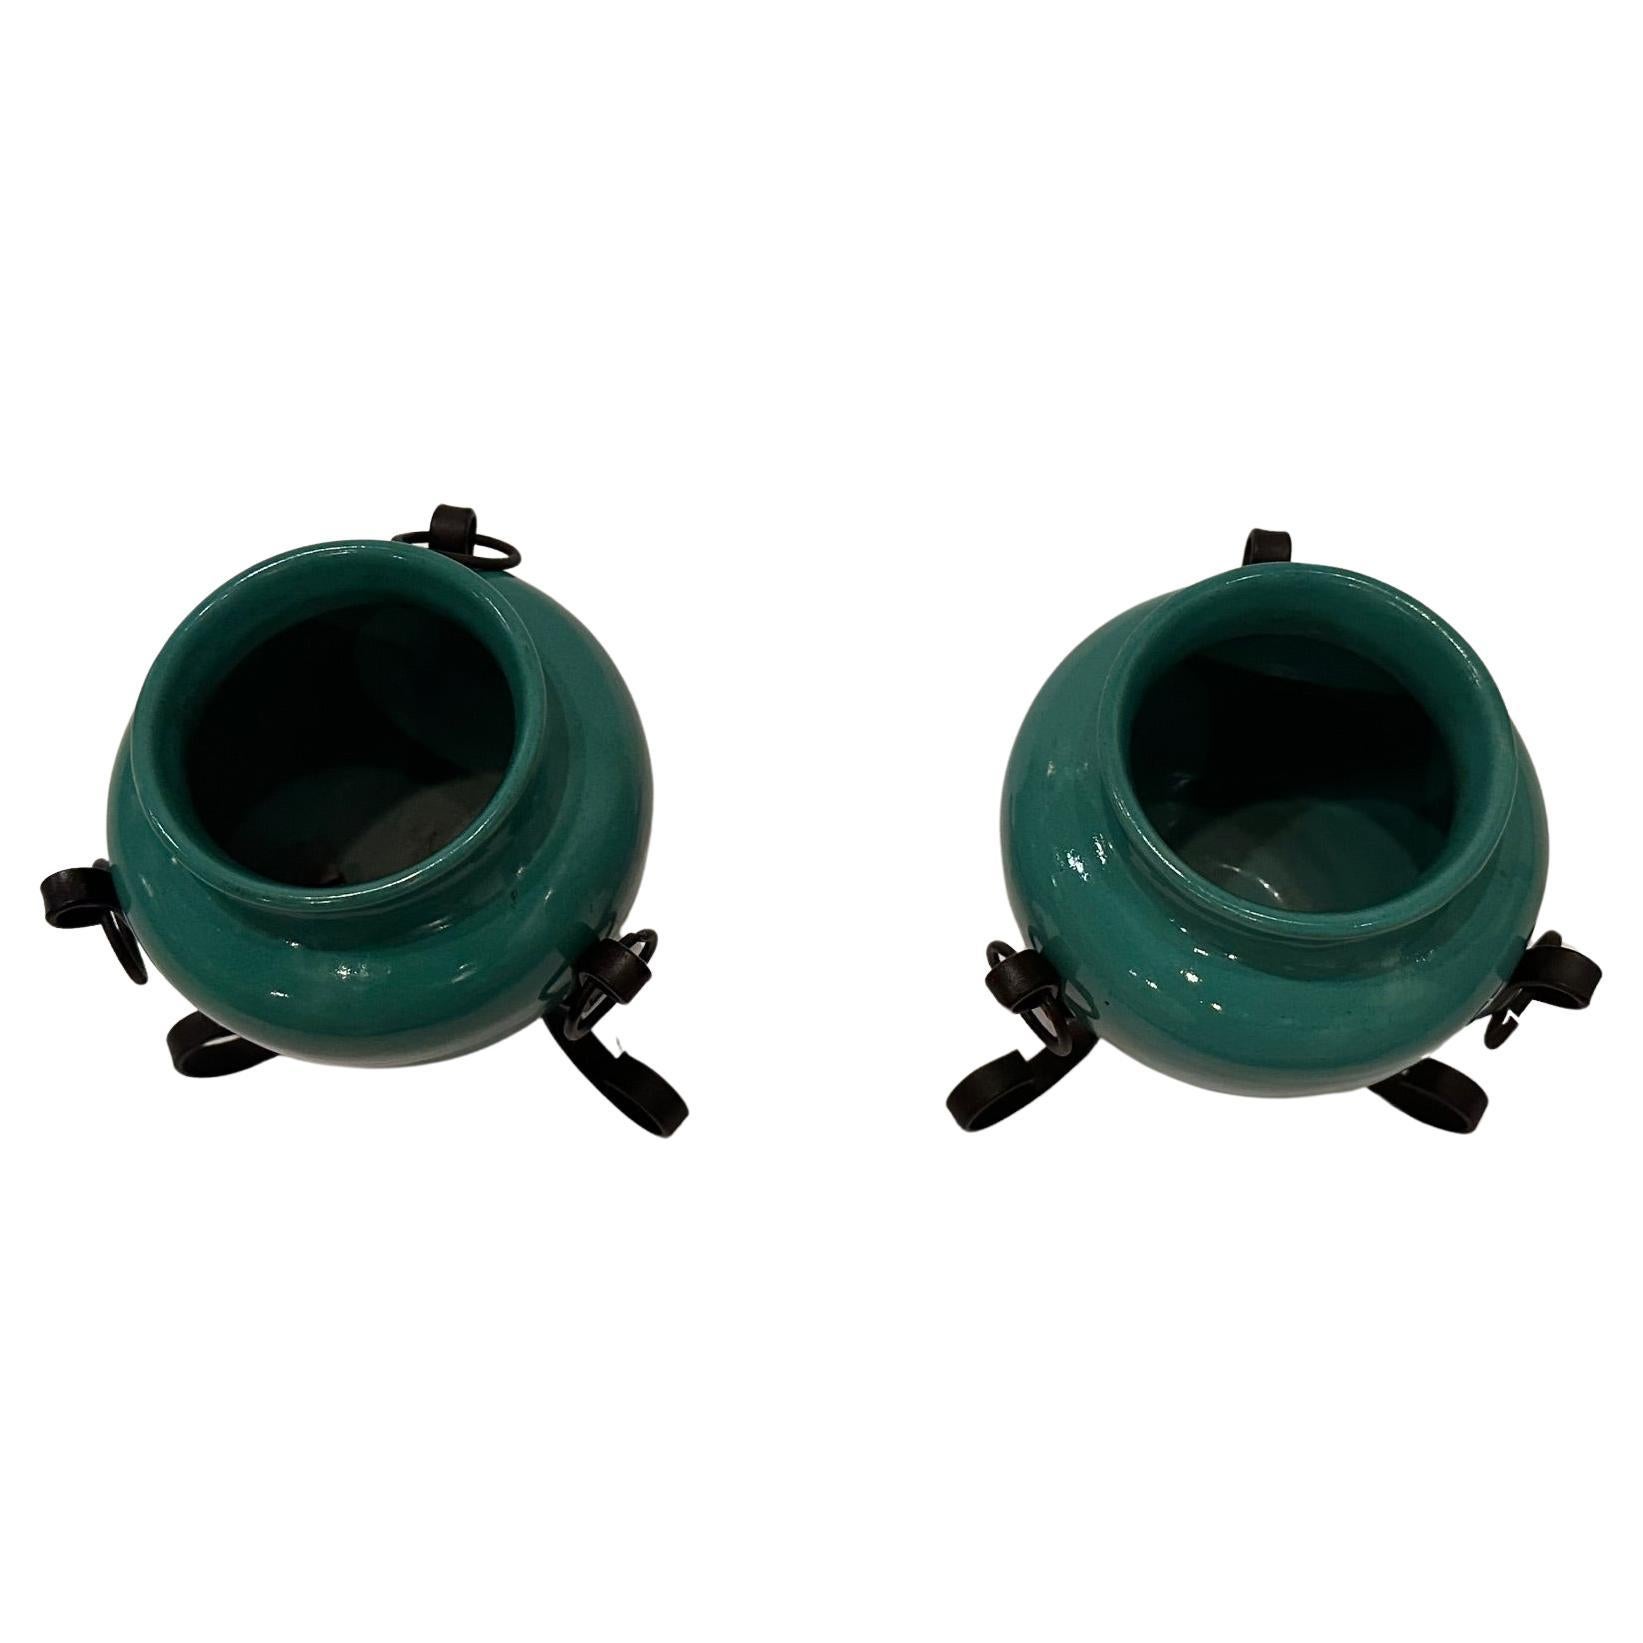 Stylish set of celadon green Italian pottery vases that sit in hand wrought iron black stands.  opening 2.75